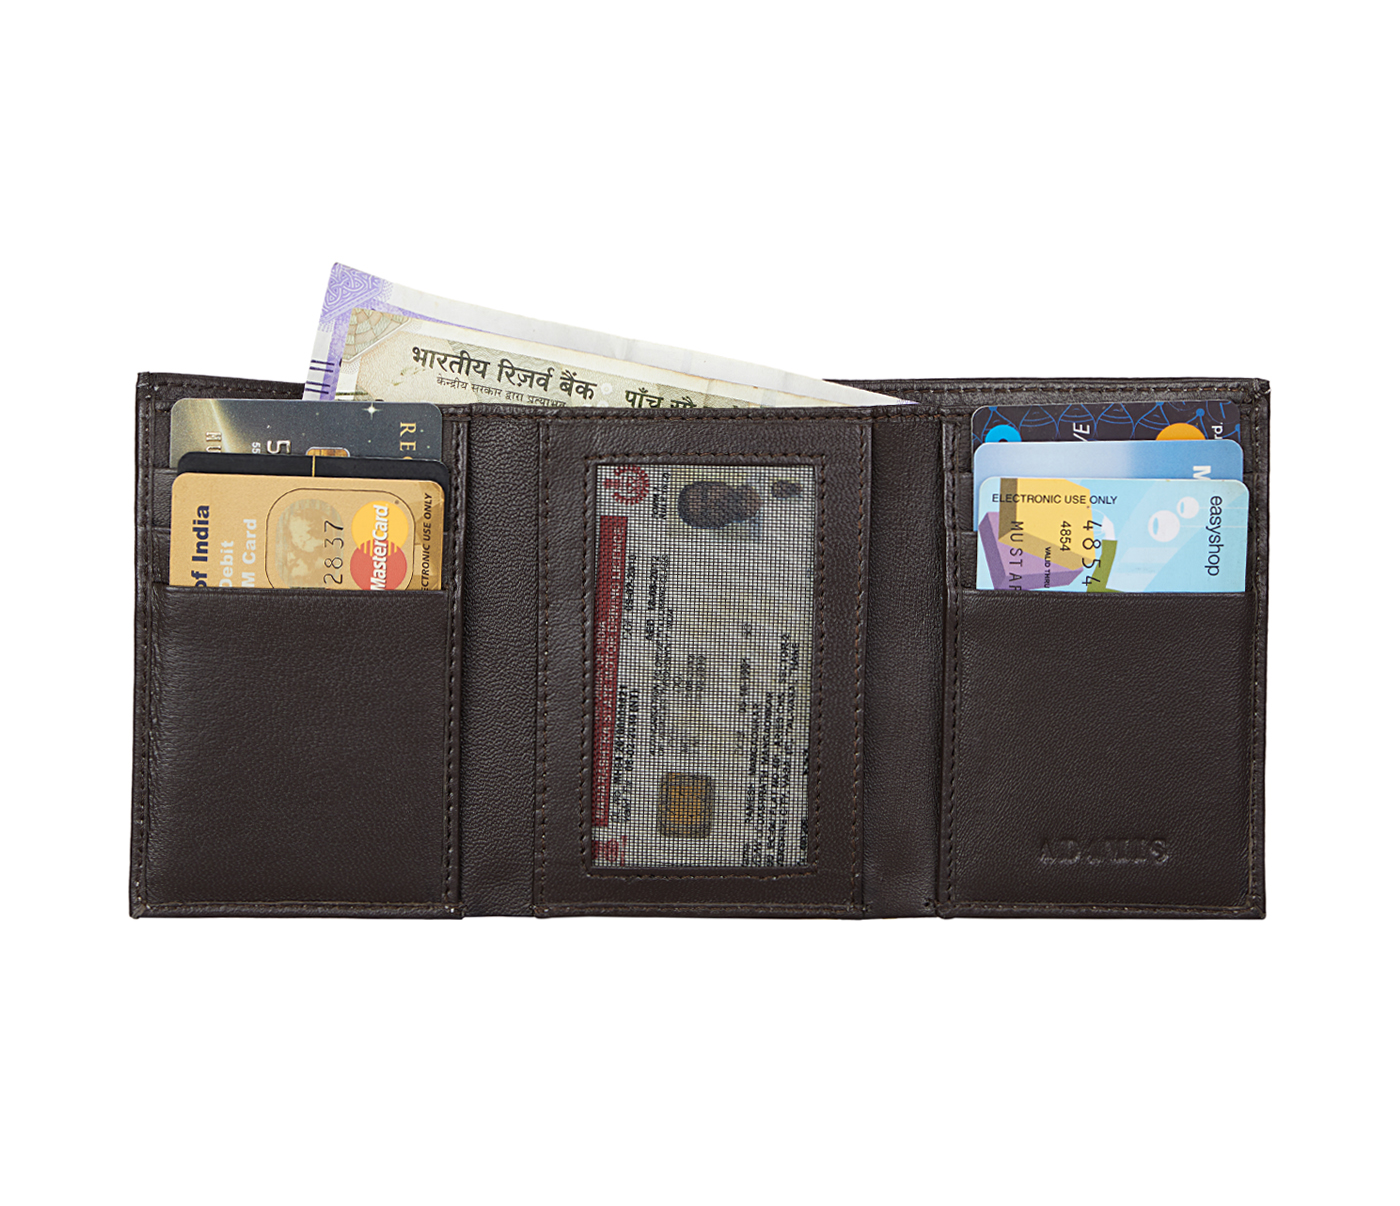 W282-Samuel-Mens's trifold wallet with photo id in Genuine Leather - Brown.